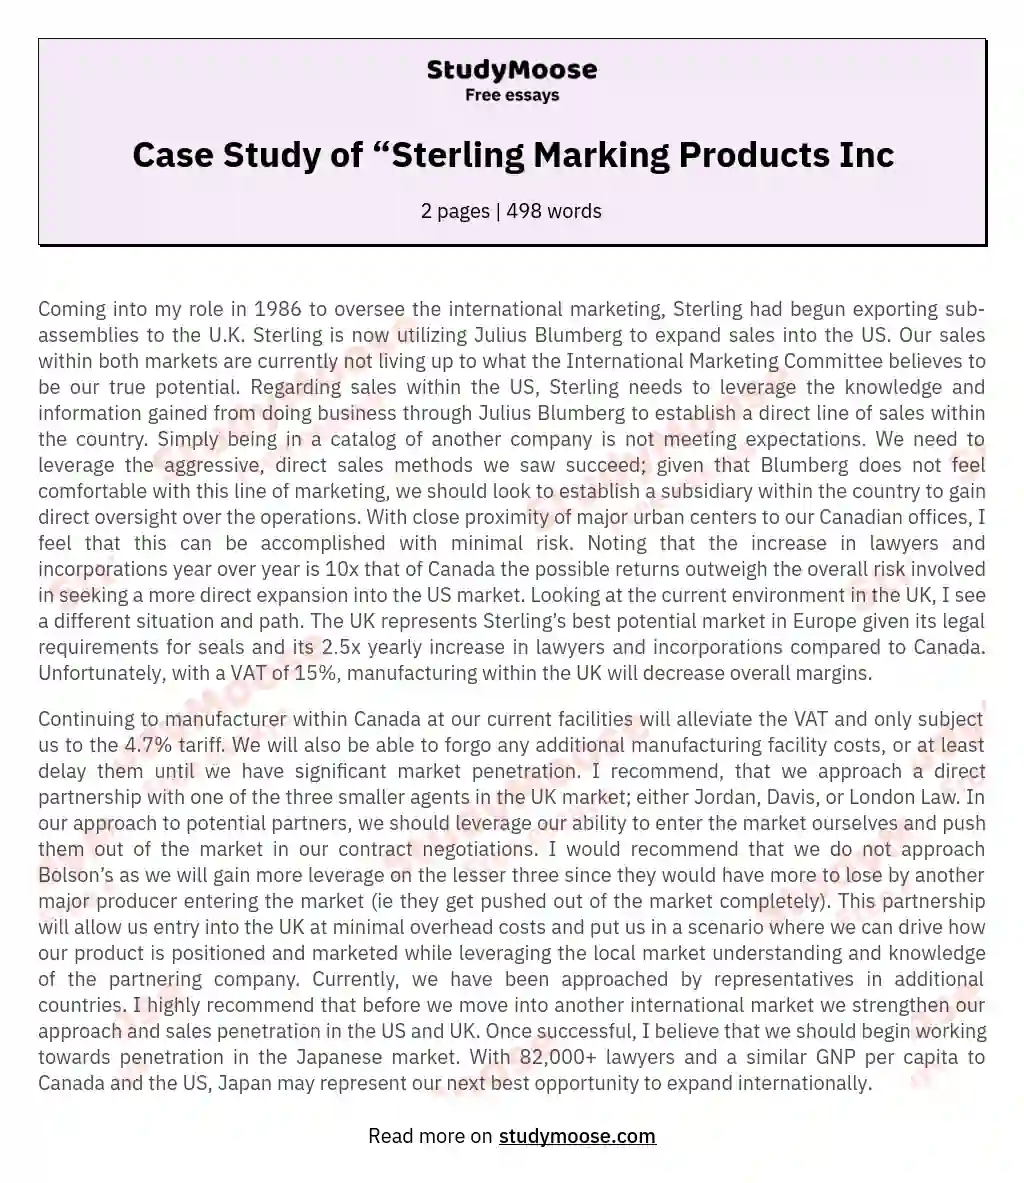 Case Study of “Sterling Marking Products Inc